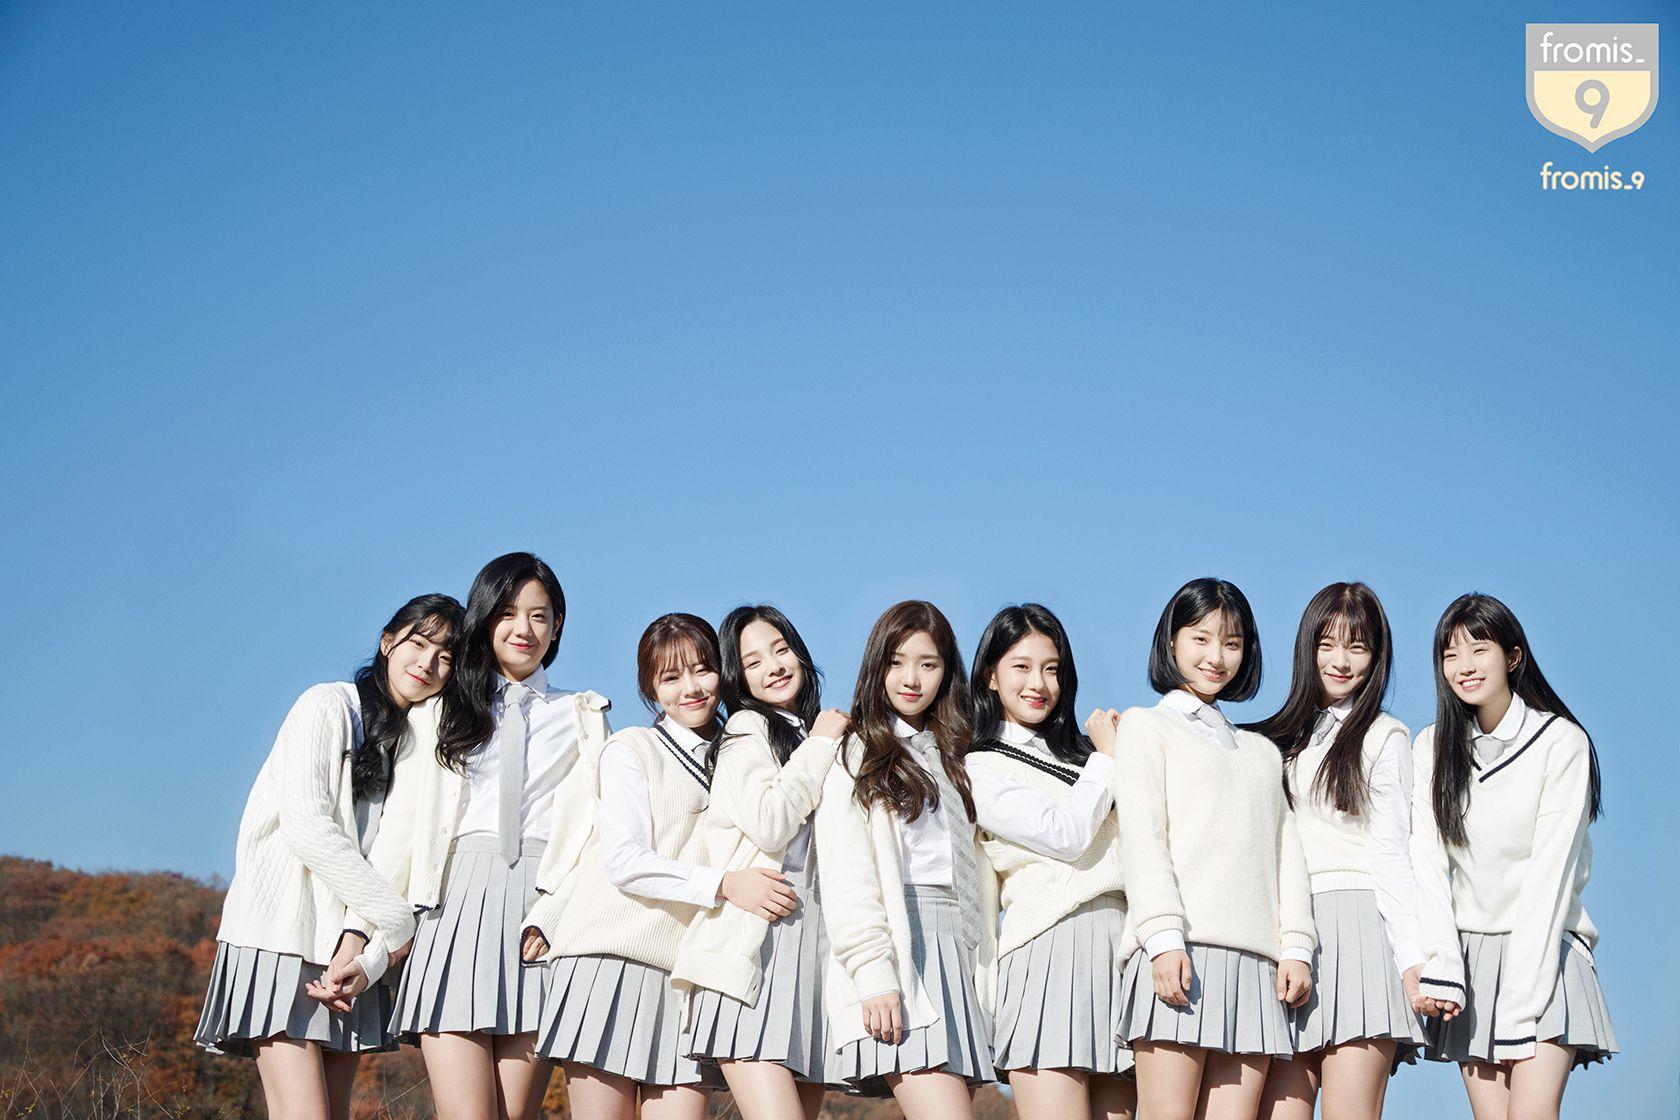 fromis_9 image Glass Shoes HD wallpaper and background photo